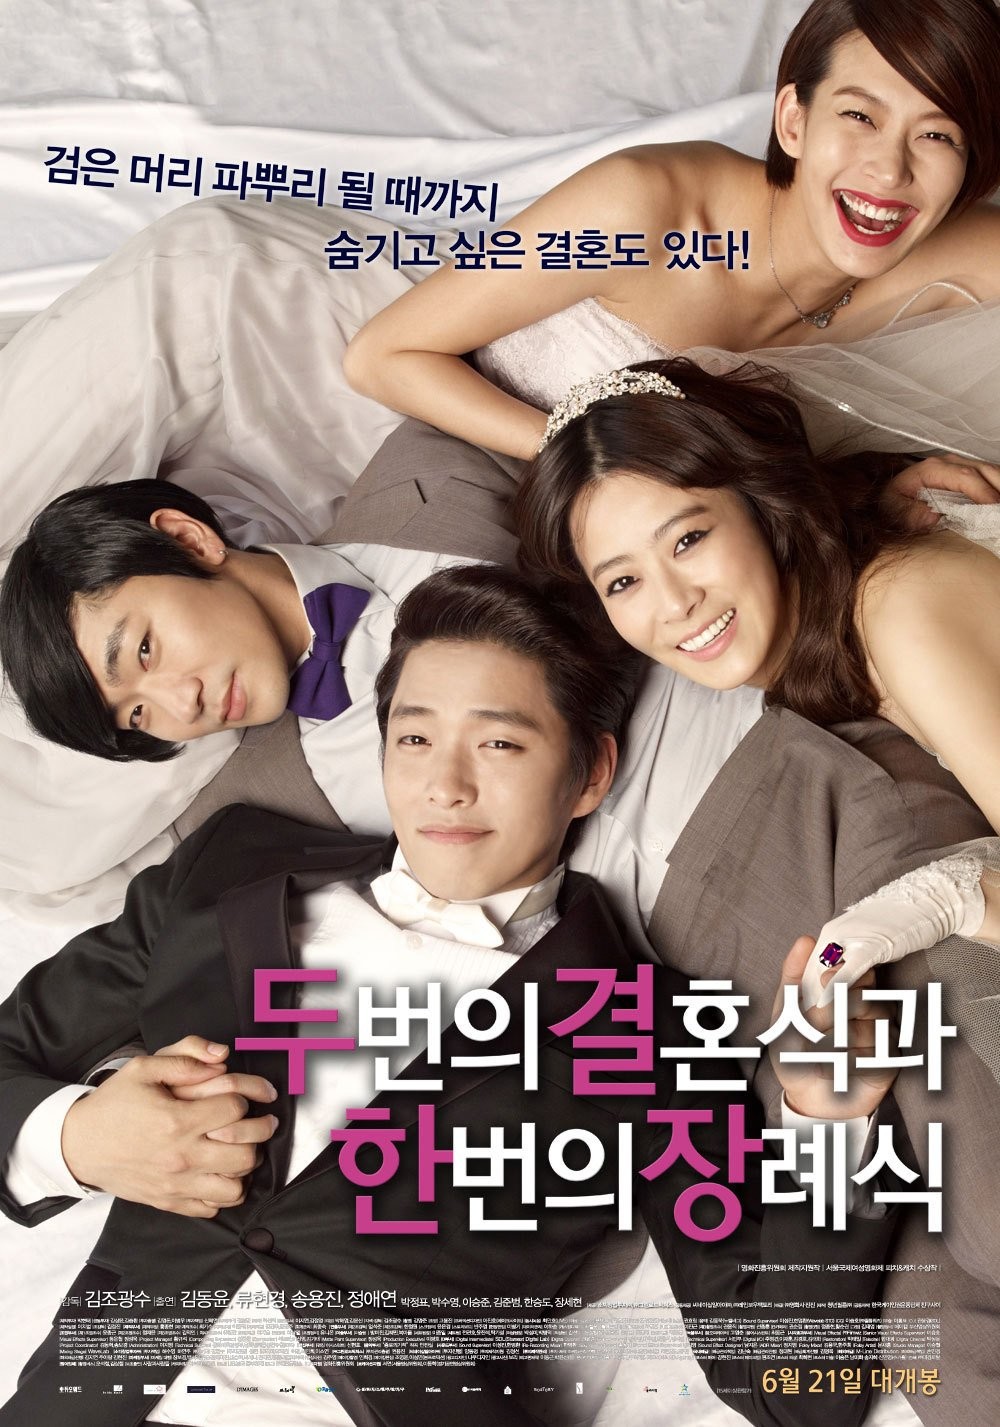 Extra Large Movie Poster Image for Two Weddings and a Funeral (#2 of 2)